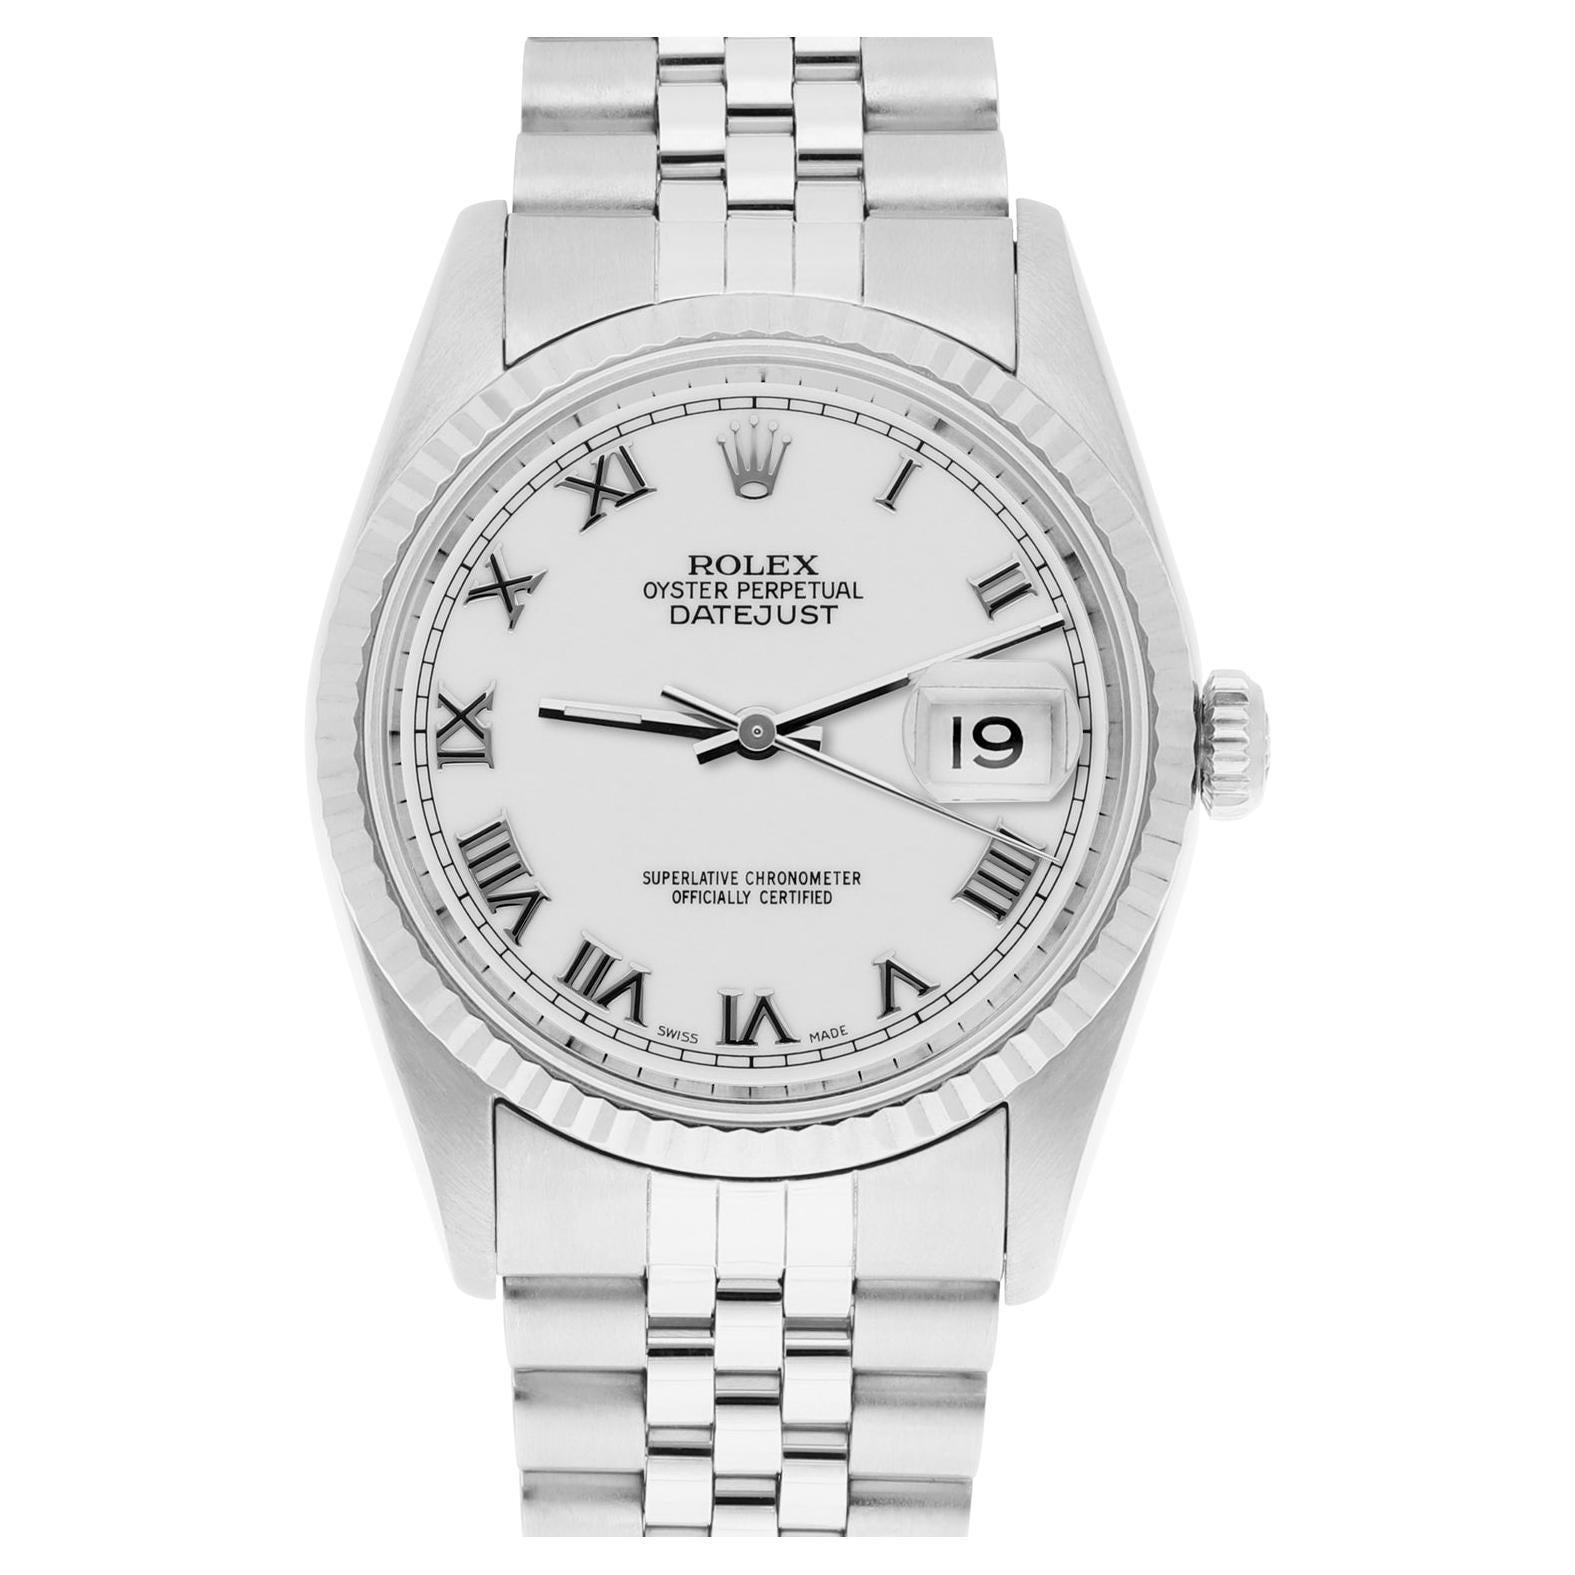 Rolex Datejust 36mm Stainless Steel 16234 White Roman Dial, Jubilee Circa 1995